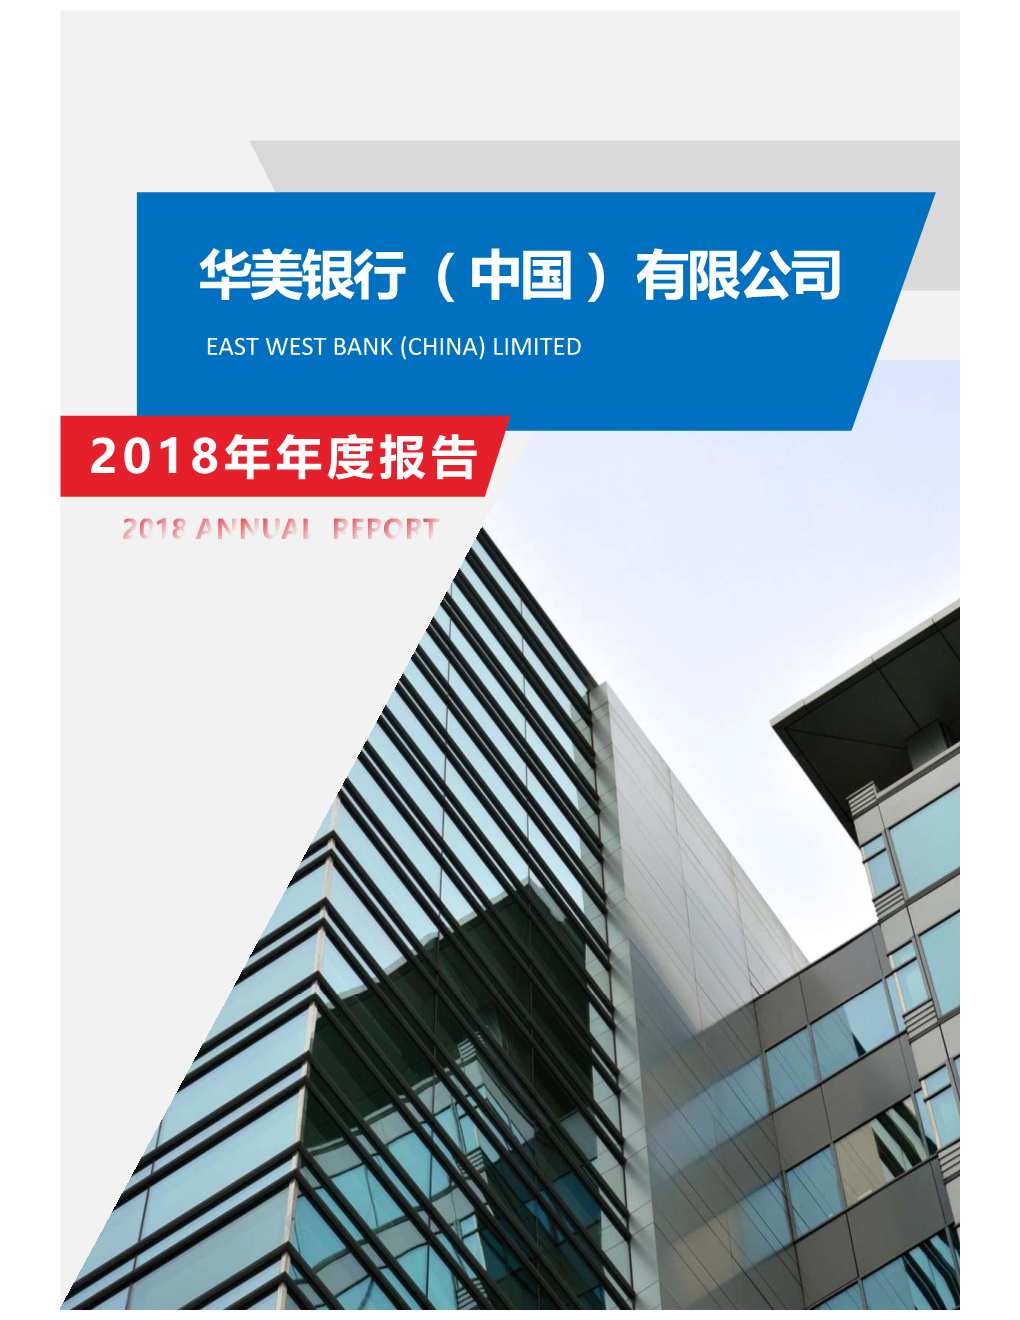 East West Bank (China) Limited